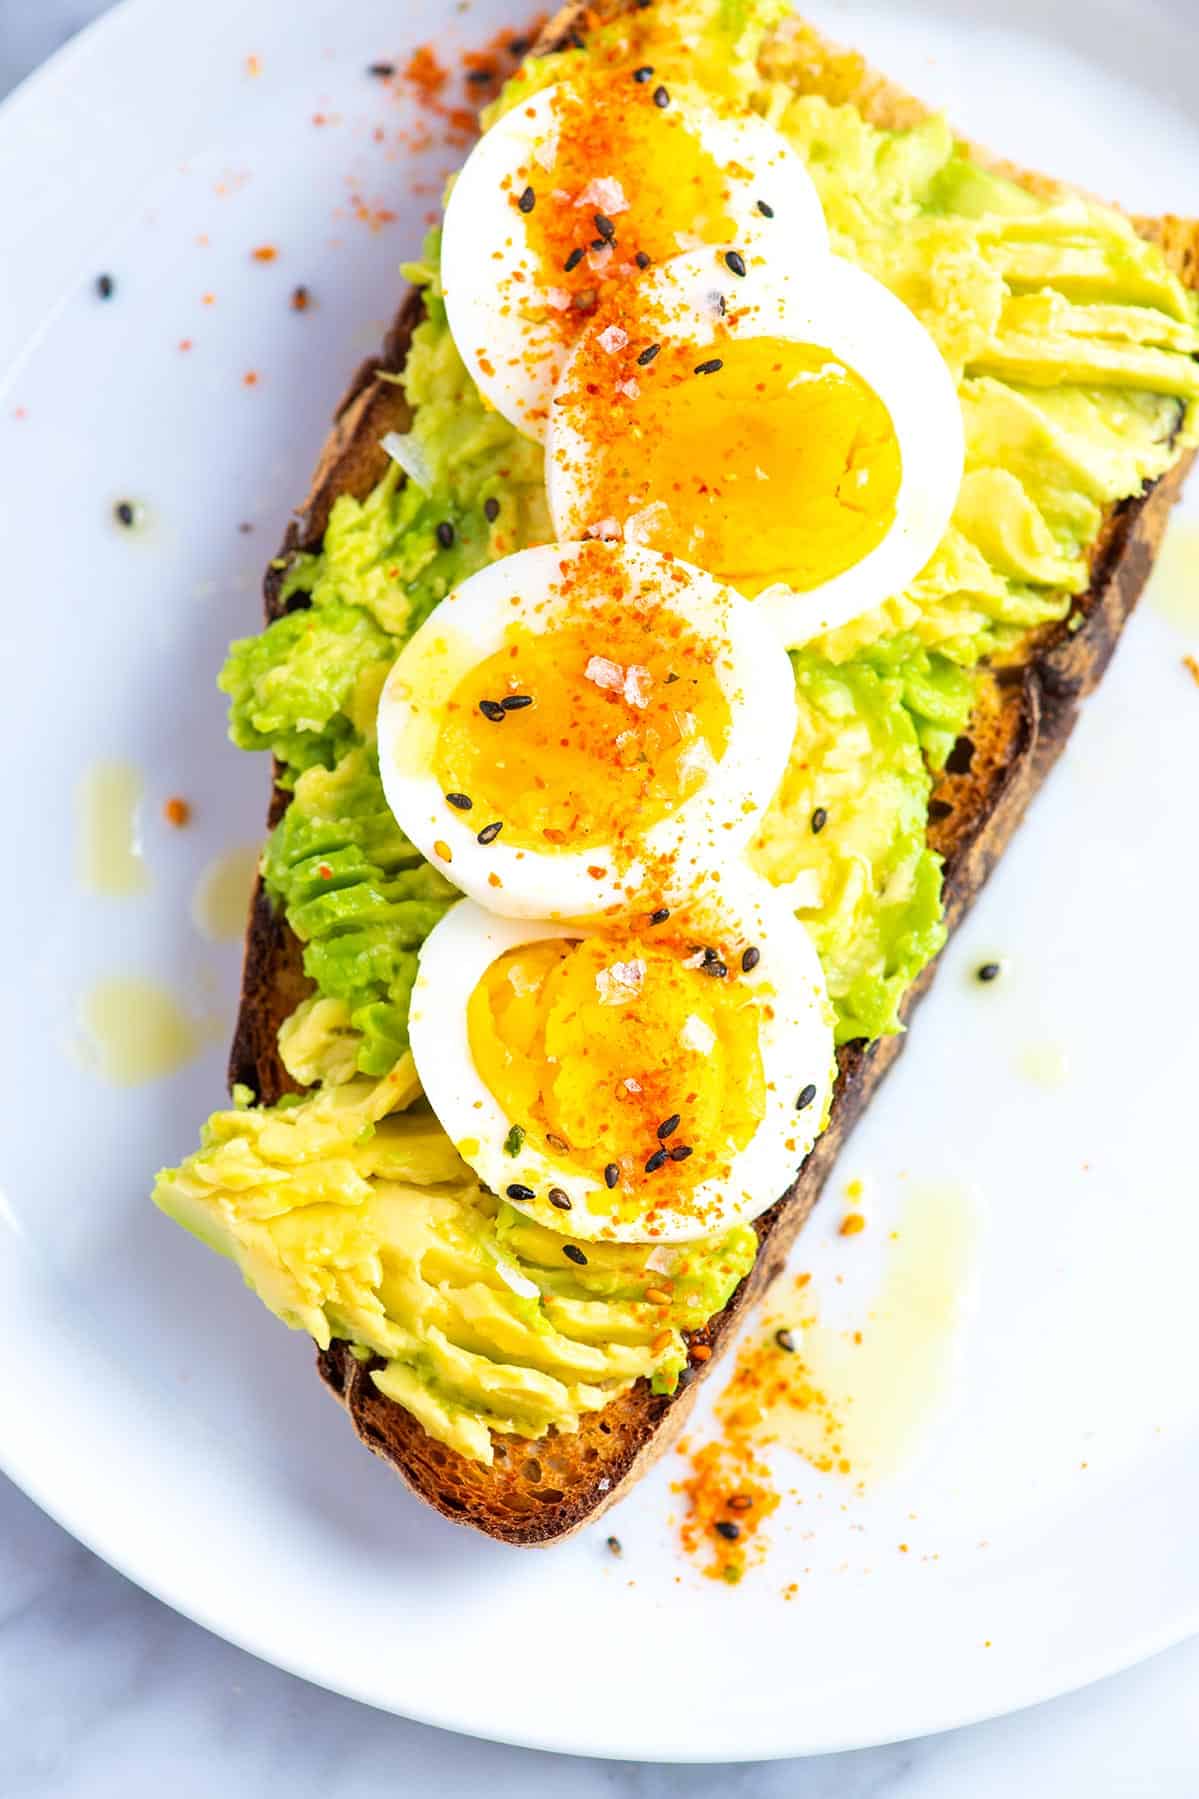 A slice of toast with smashed avocado, spices, and hard boiled egg.